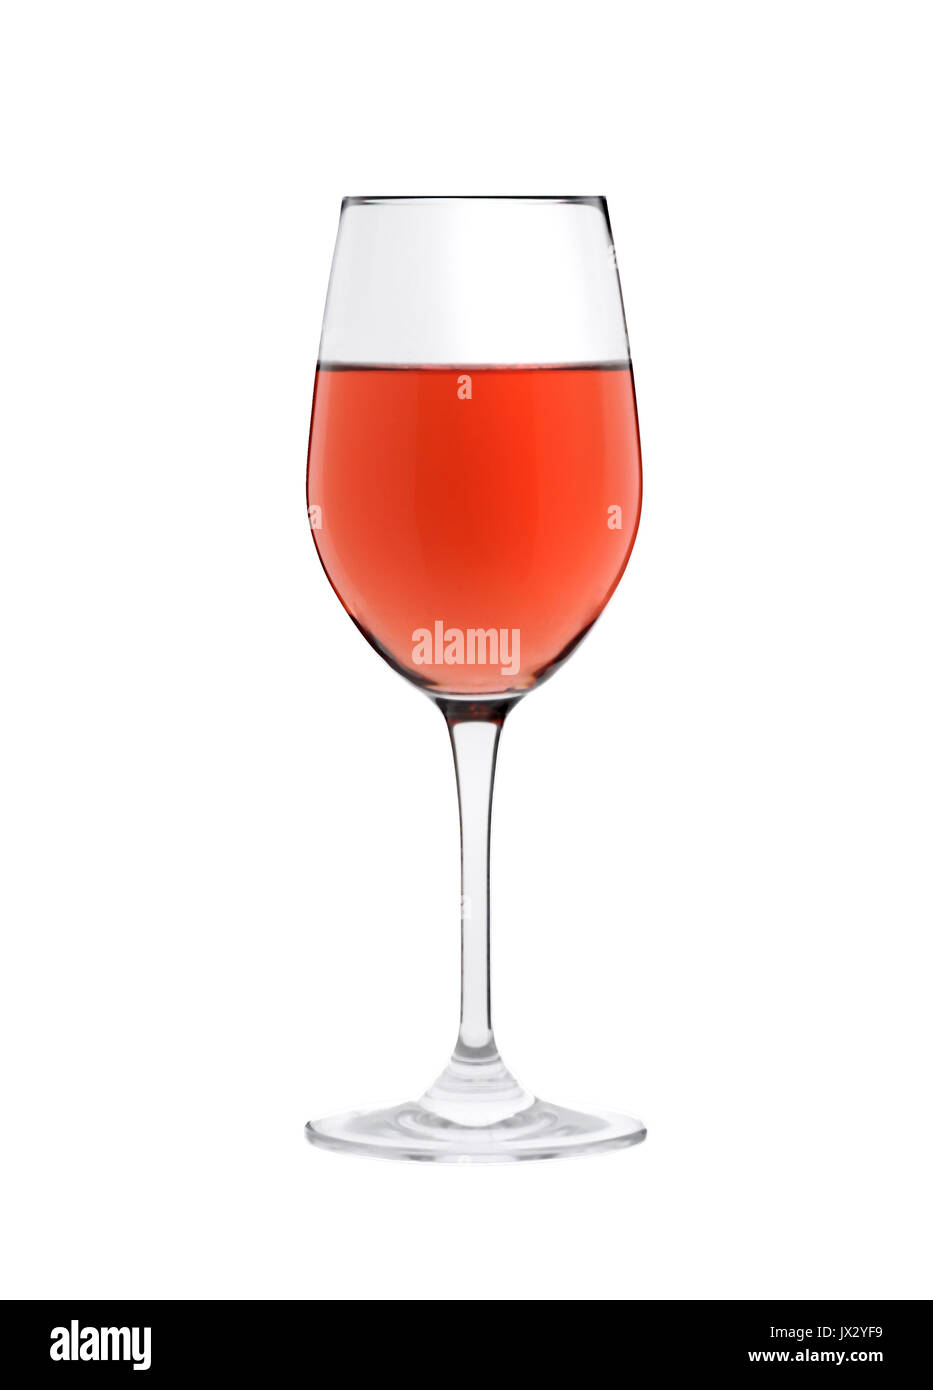 Clear cut glass of rose wine Stock Photo